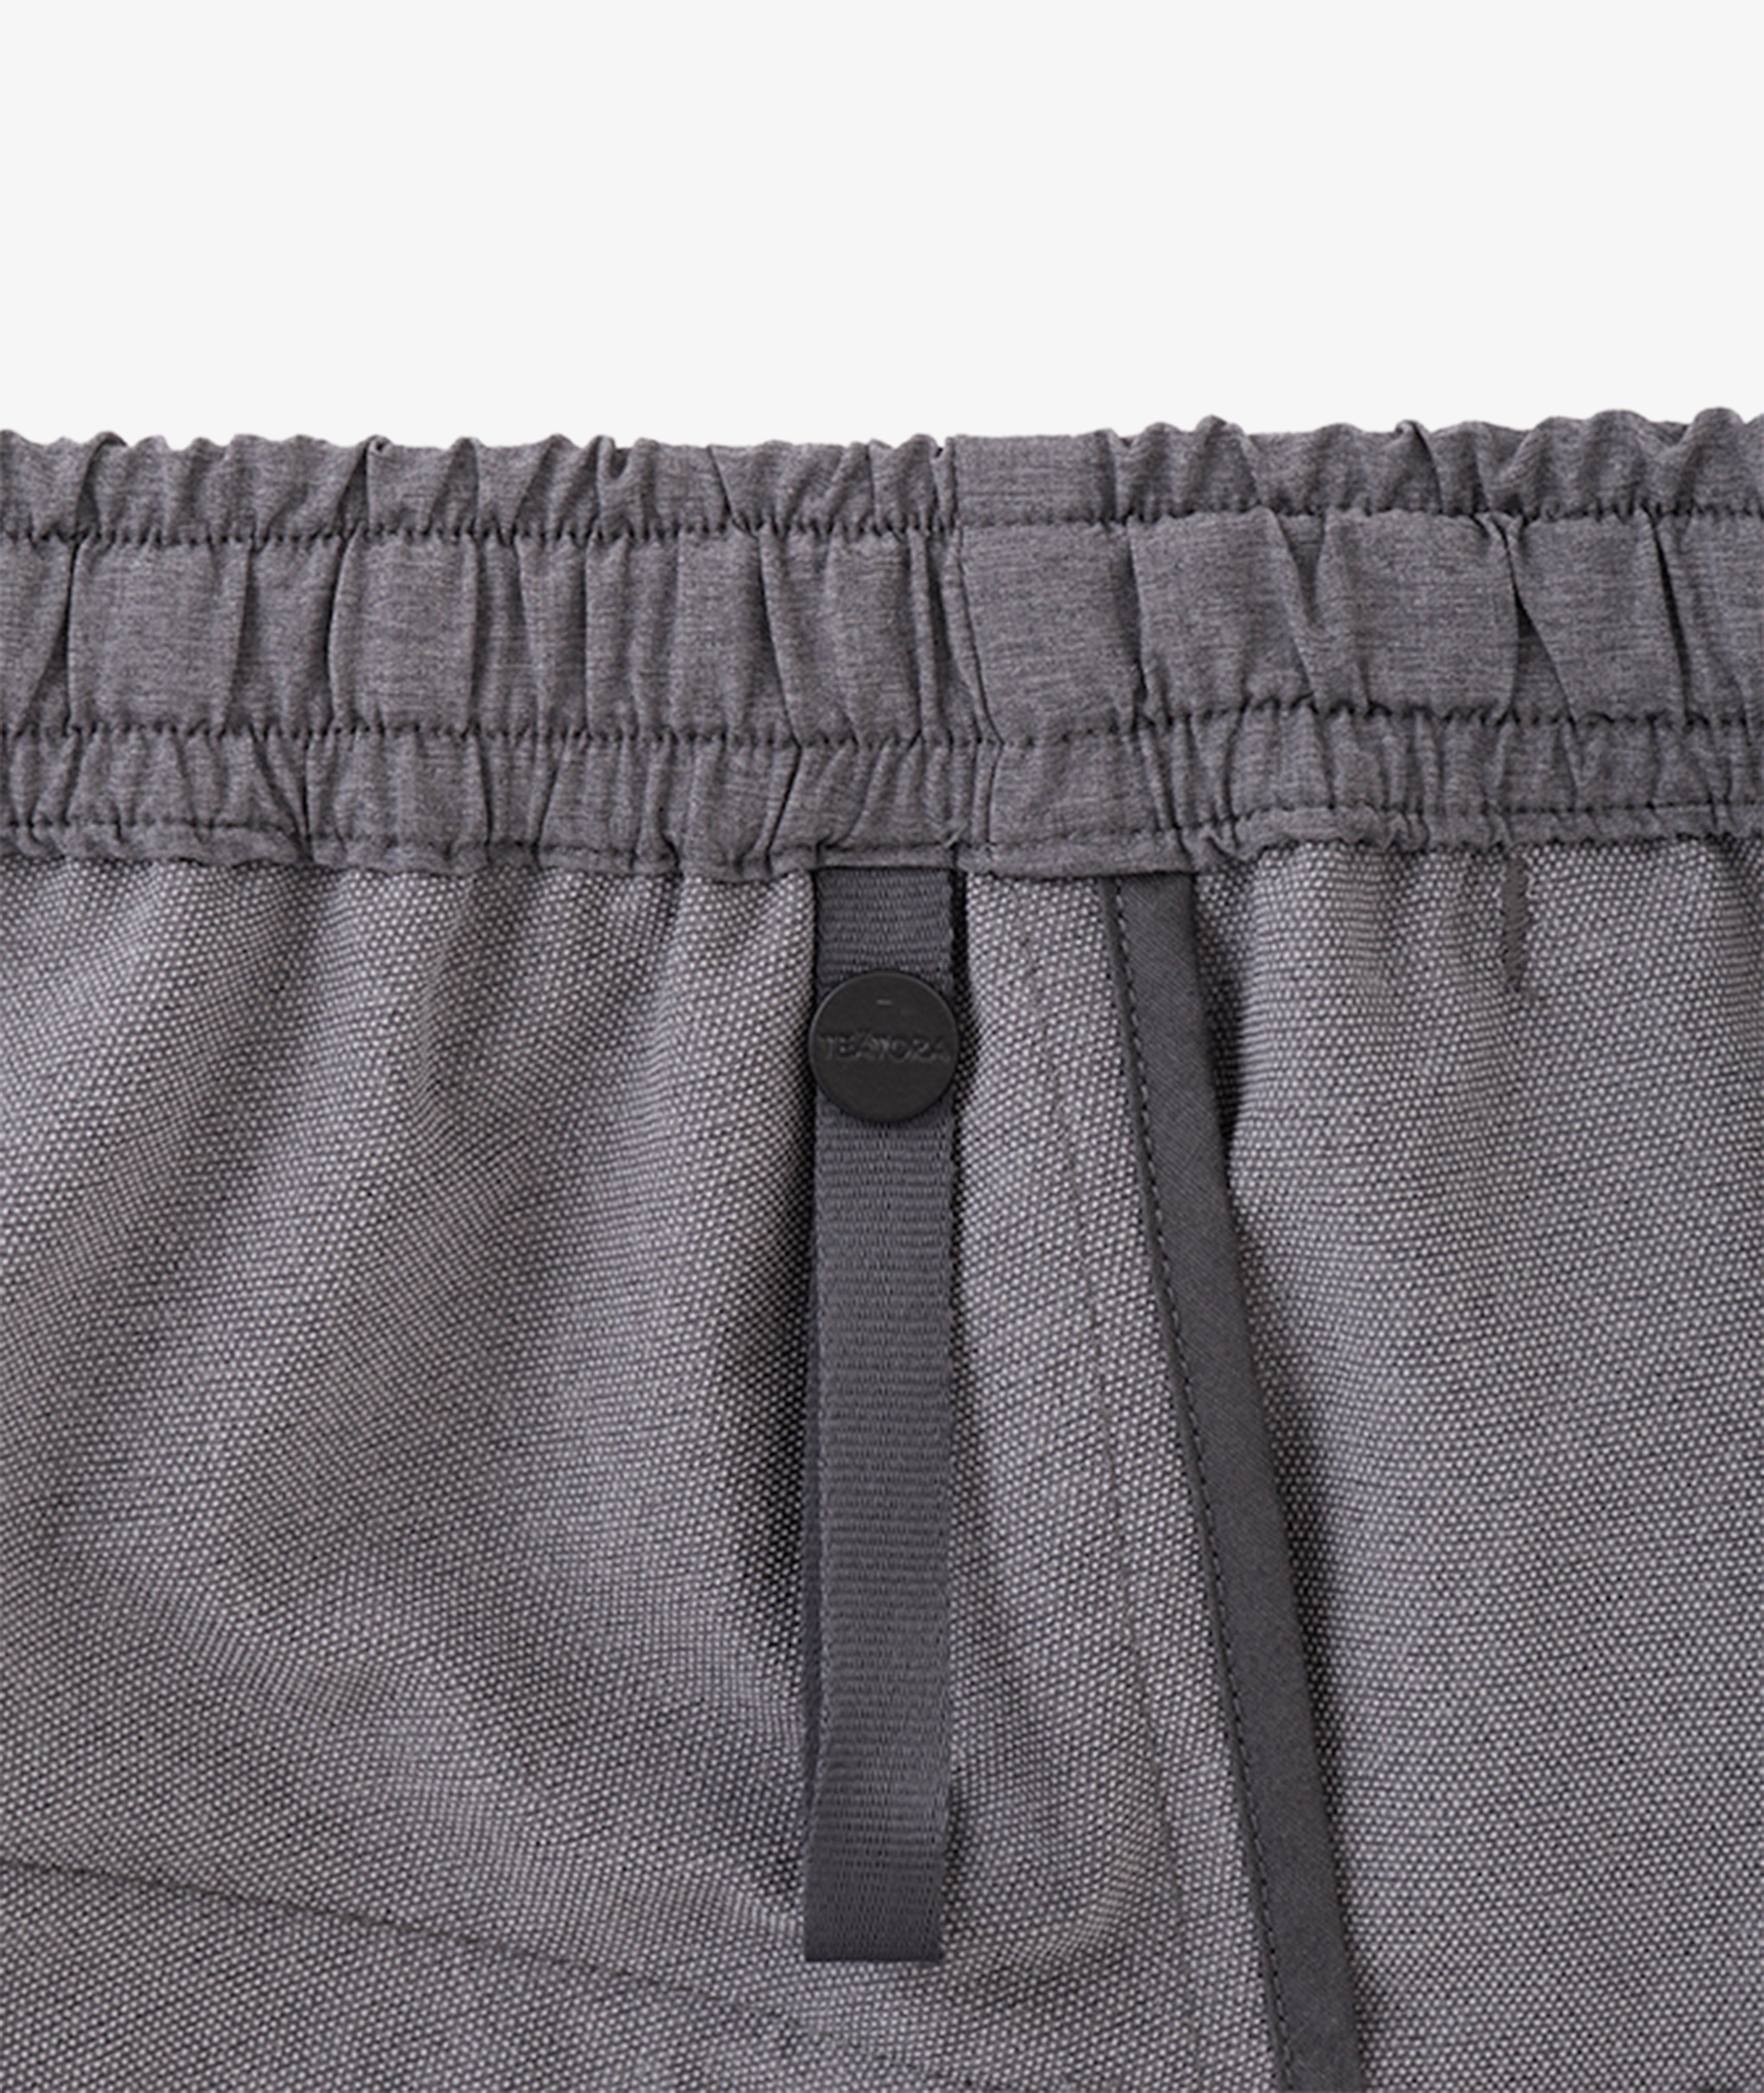 Norse Store | Shipping Worldwide - TEÄTORA Packable Wallet Pants